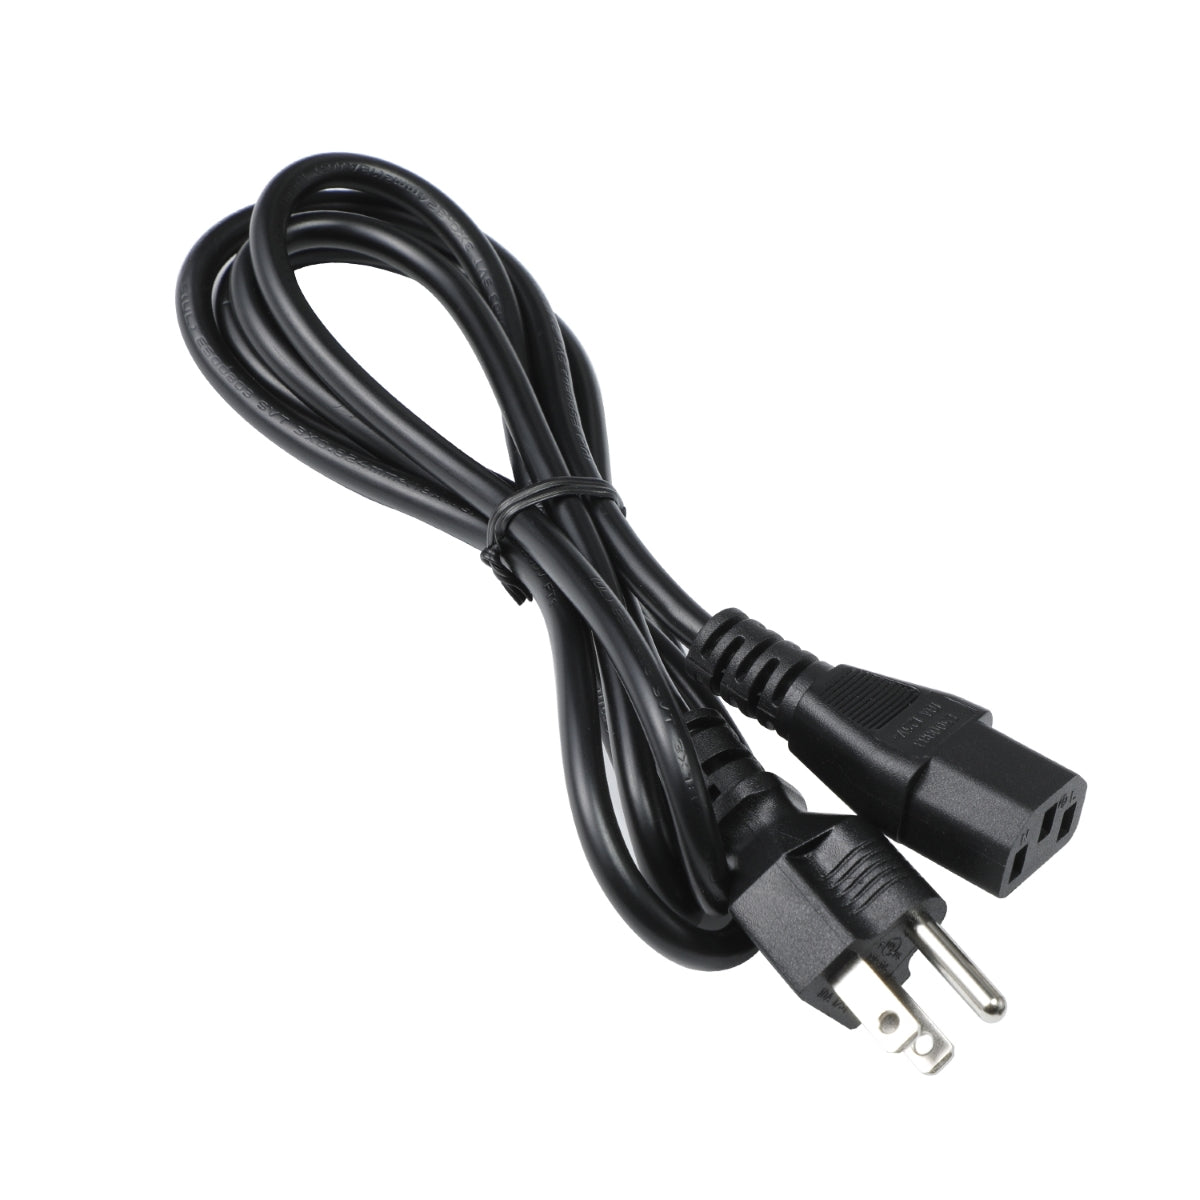 Power Cord for Dell UP2720Q Monitor